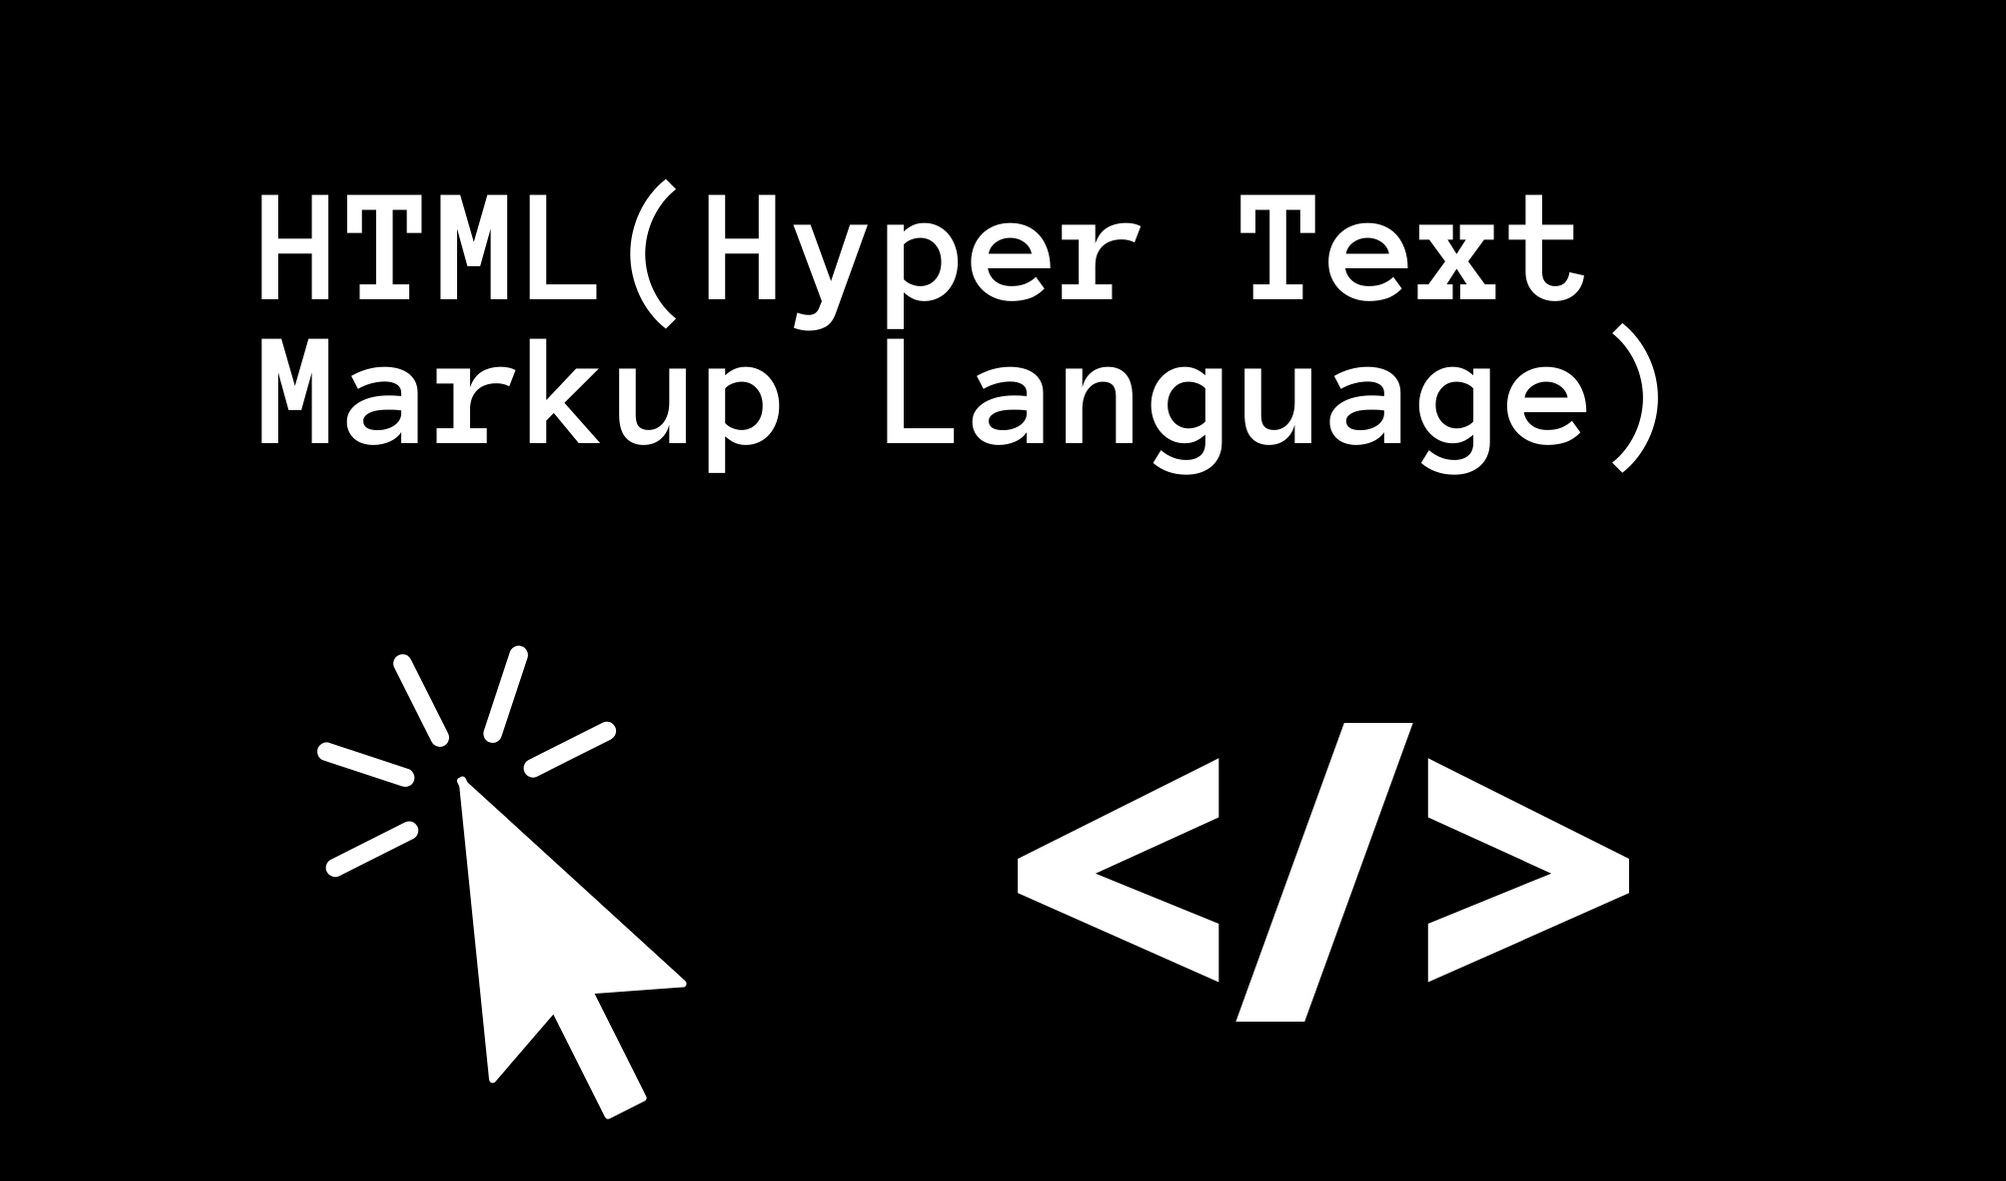 What is HTML (Hyper Text Markup Language